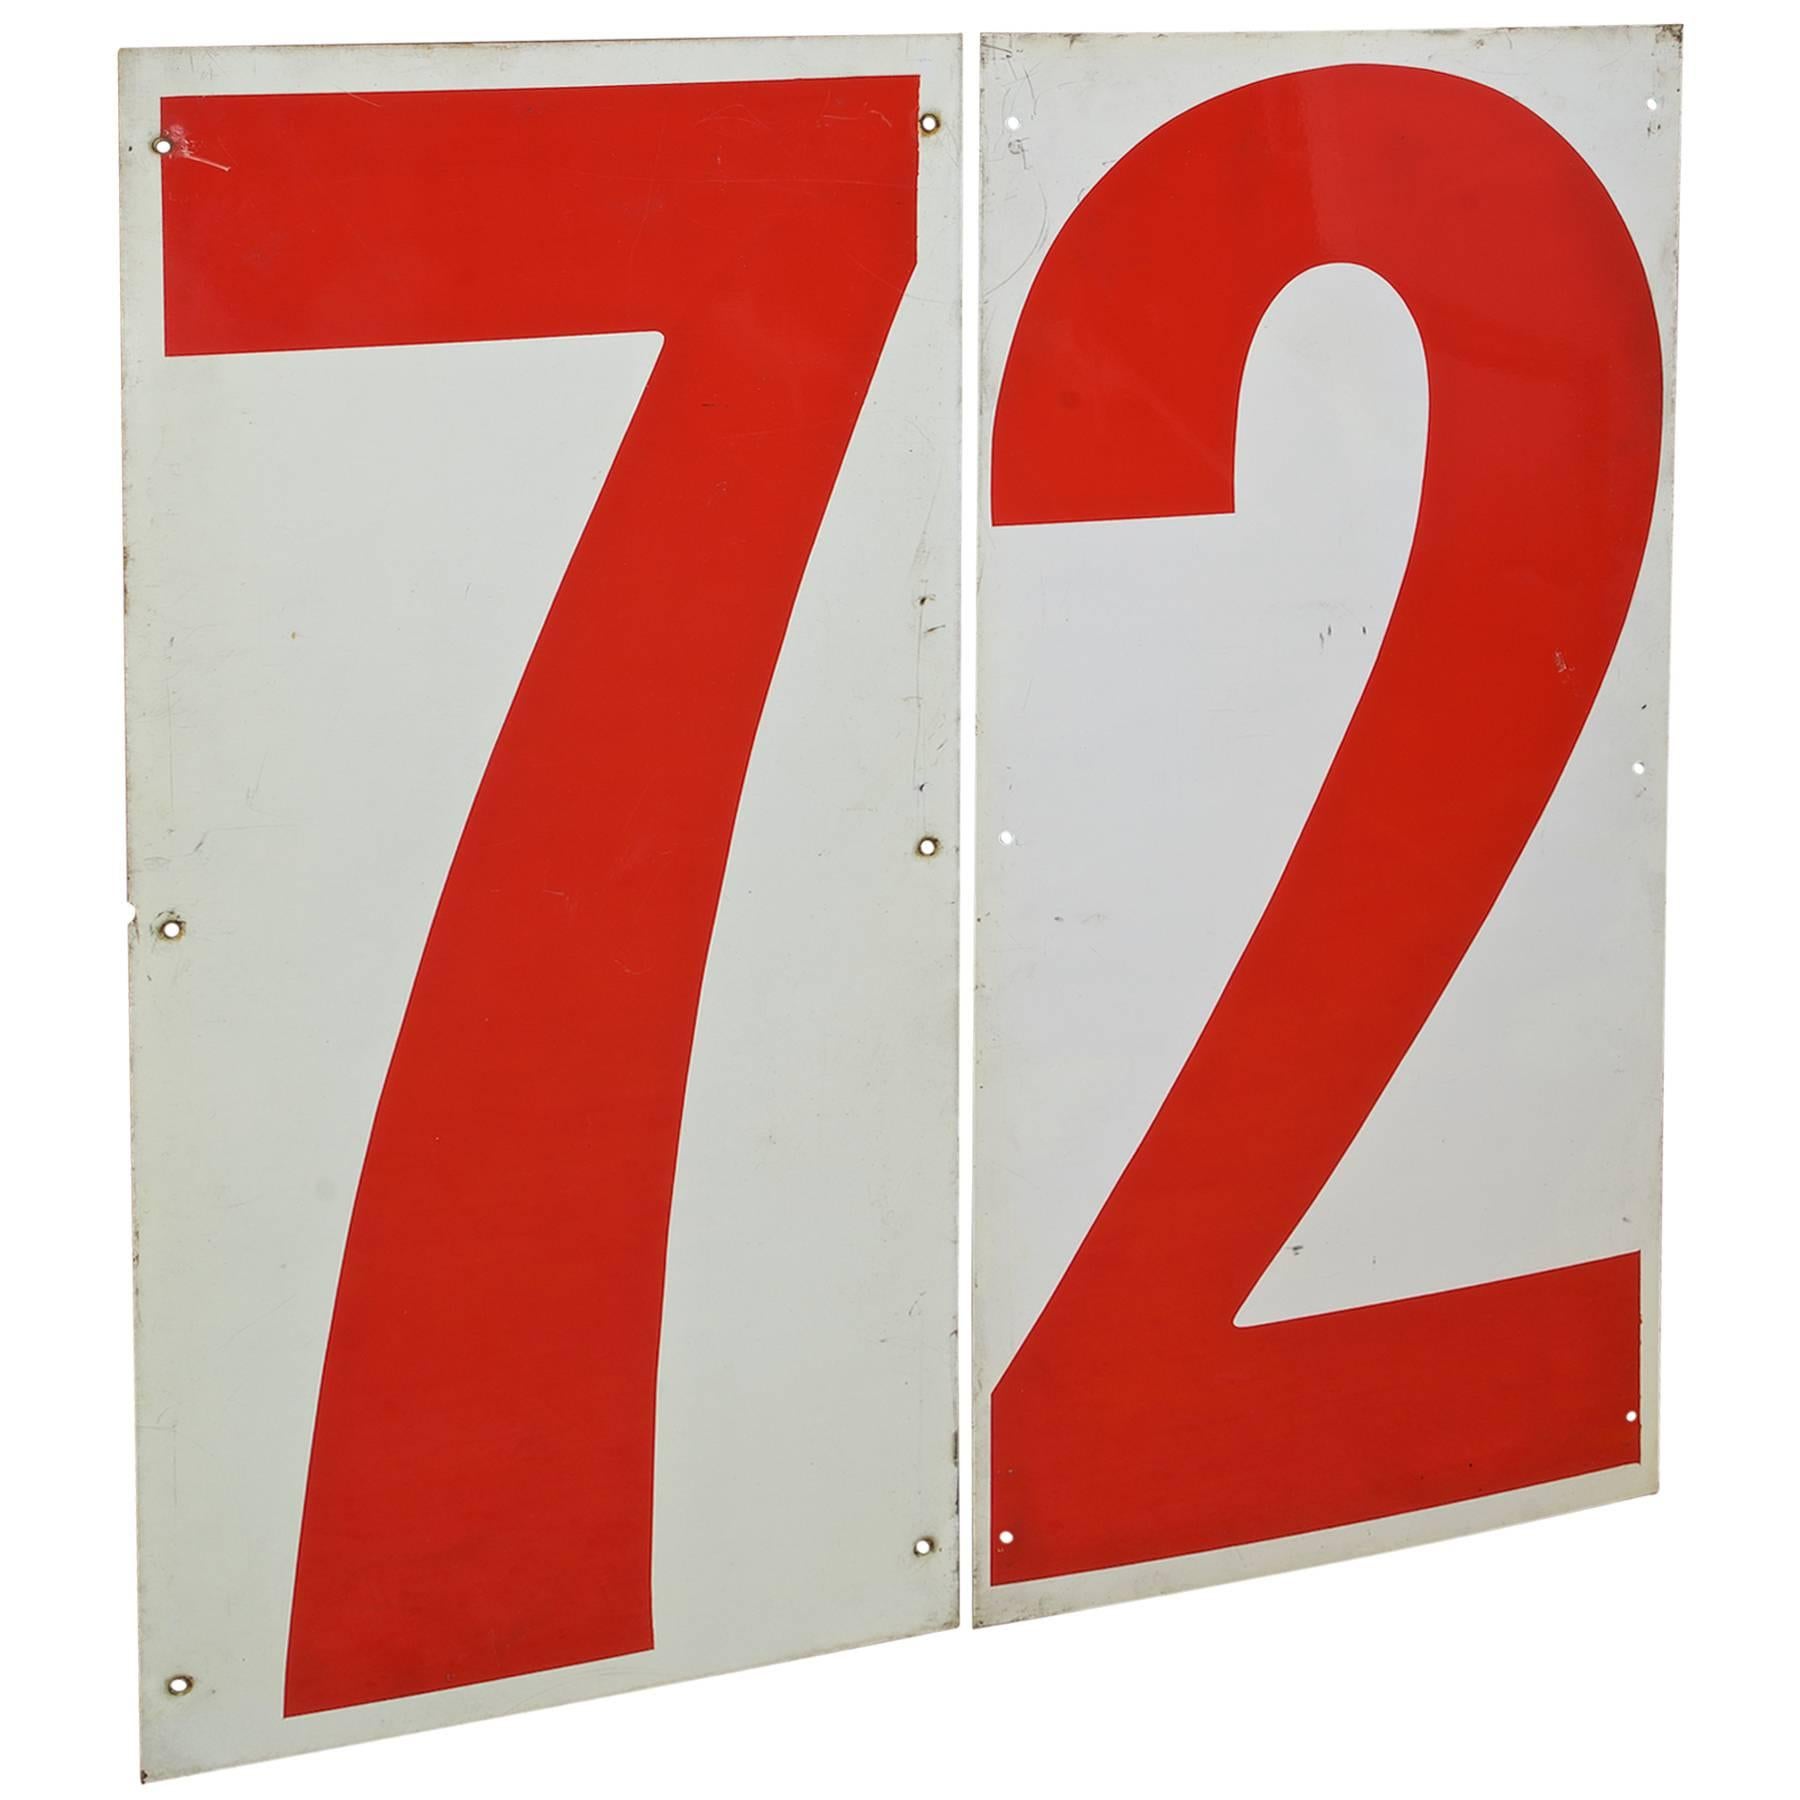 Huge Industrial Pop Art Red and White Truckers Gas Station Numbers